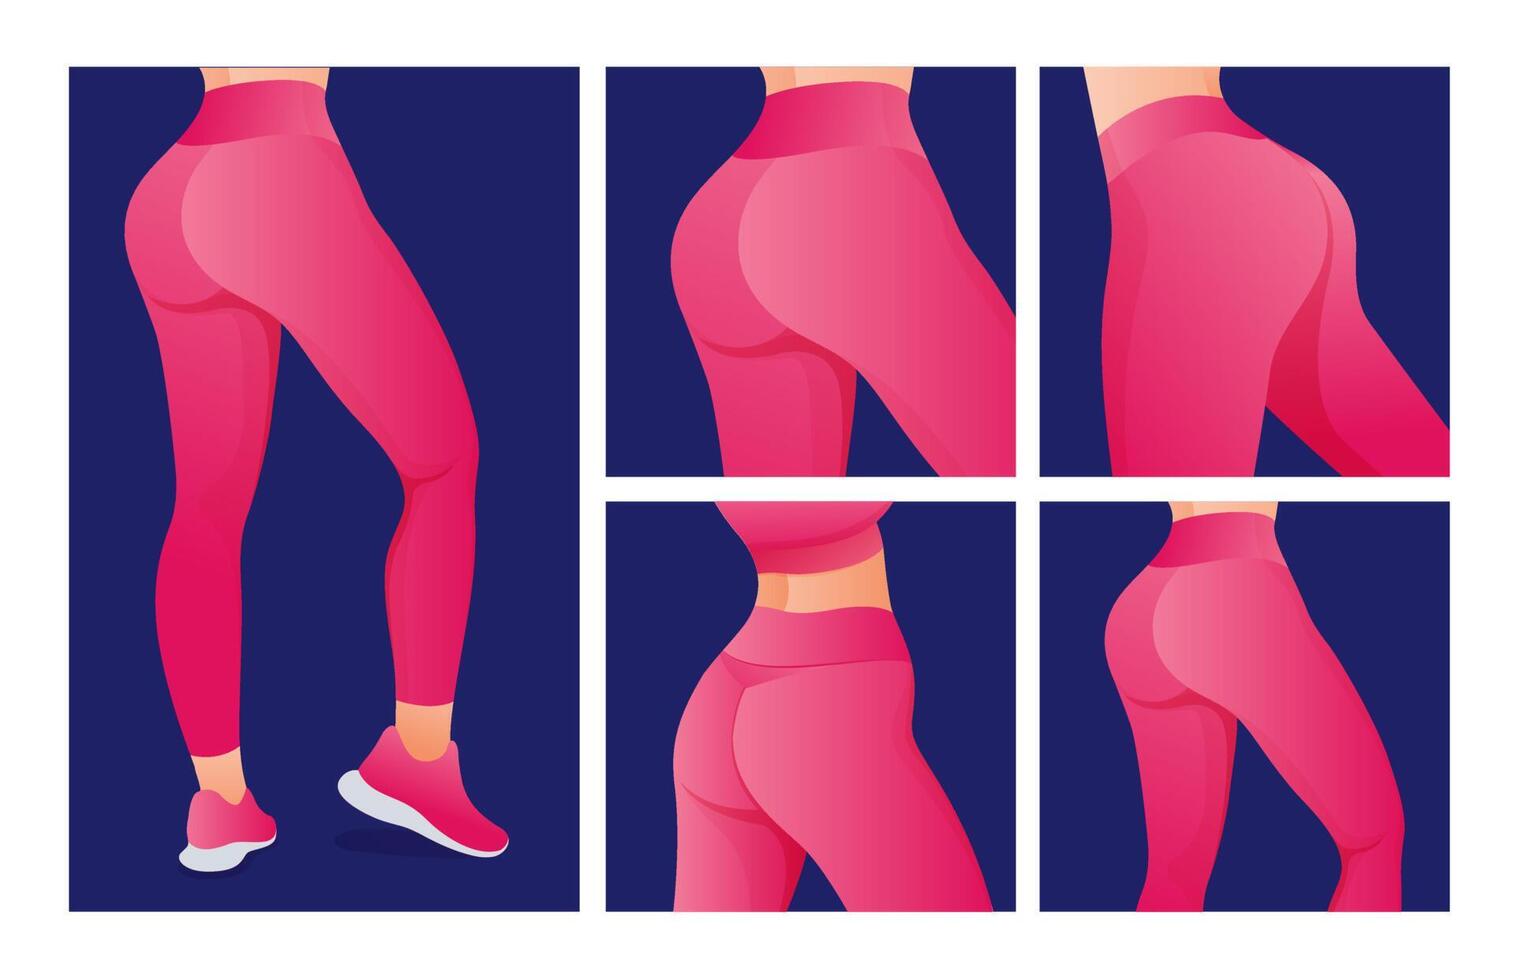 fitness icons set. Set Of Perfect slim toned young body of the girl. sporty woman in sportswear, shorts butt icon for mobile apps, slim body, vector illustration.